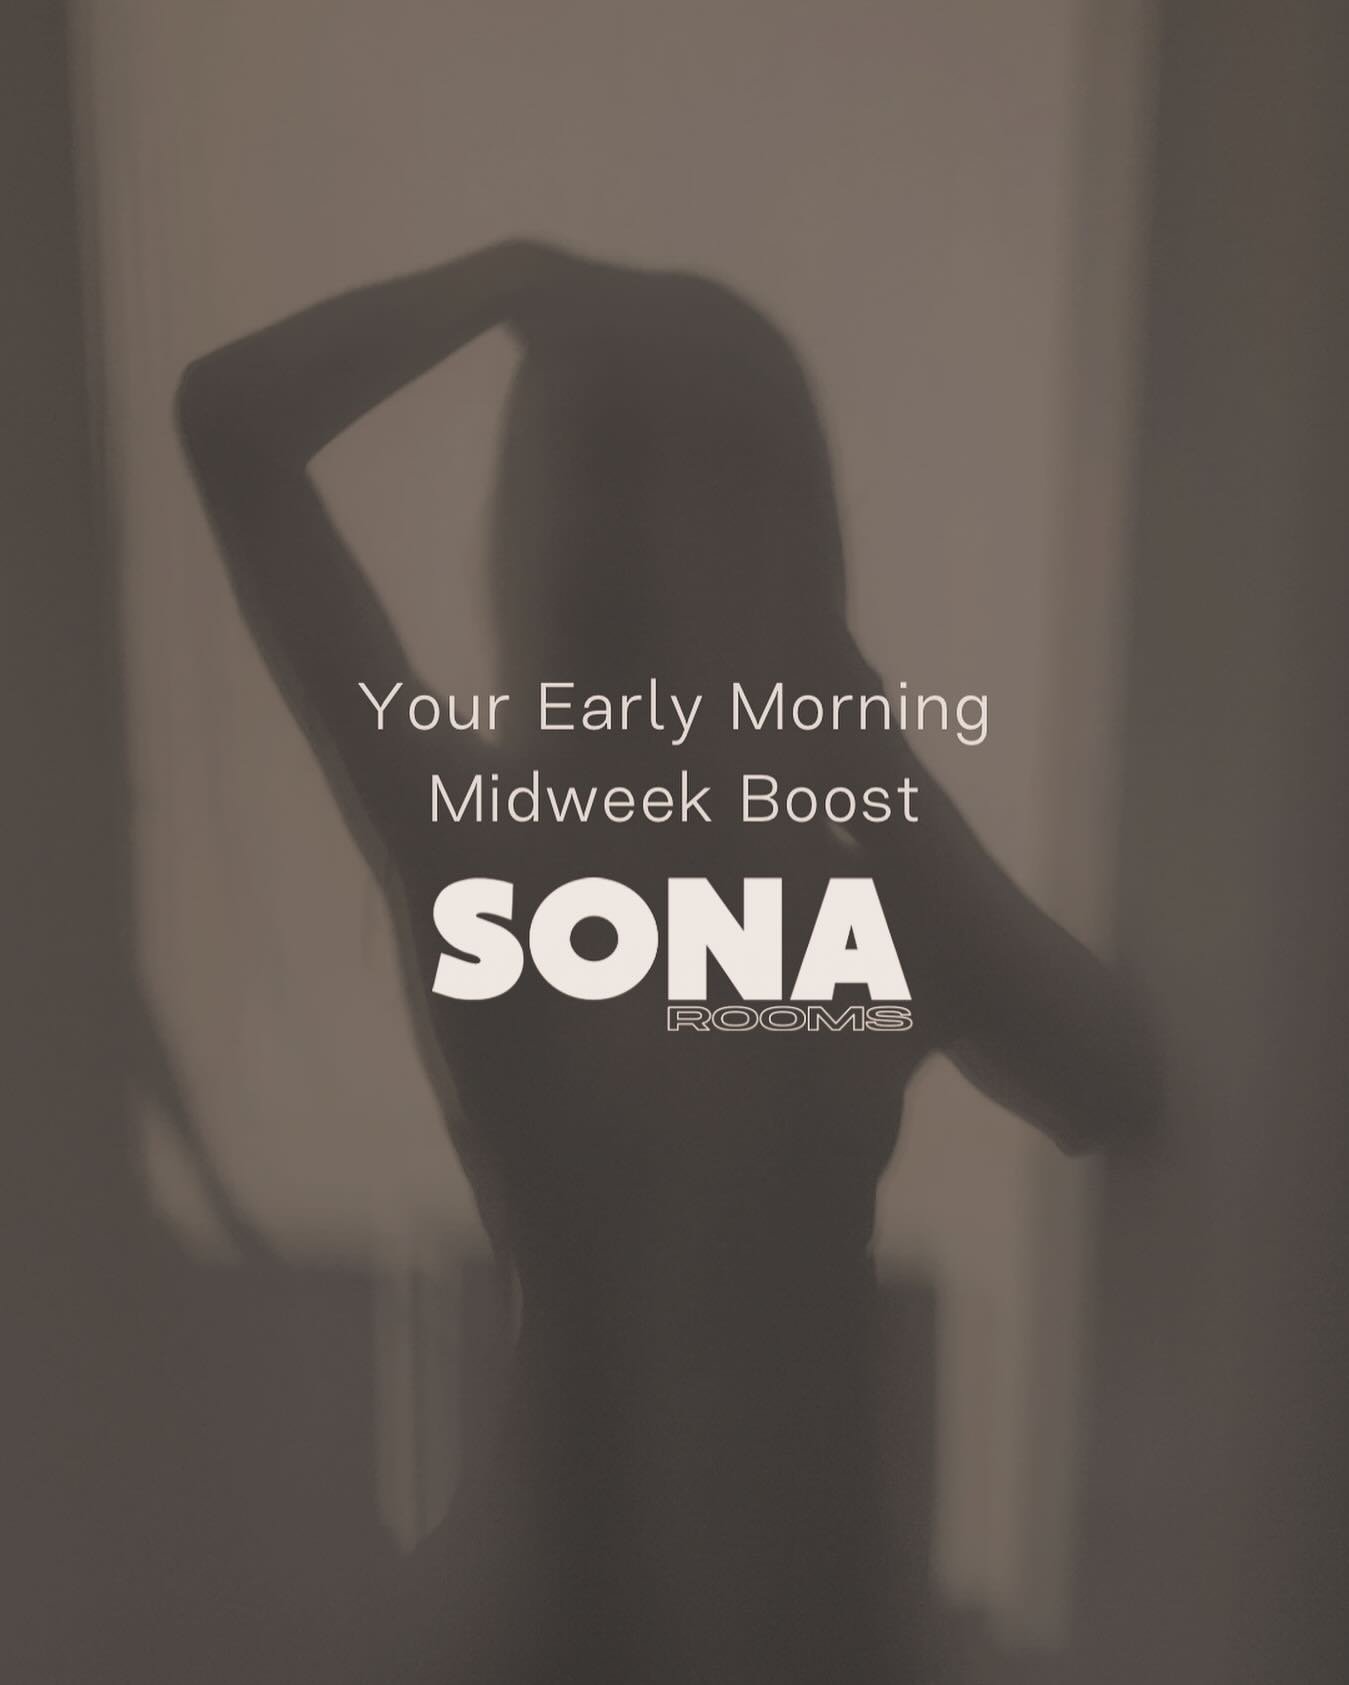 Ignite your morning routine with a sauna session that energises from the inside out. The heat will awaken your senses, sharpen your mind, and increase your focus &mdash; all the perks of a morning coffee minus the slump. The surge in blood circulatio